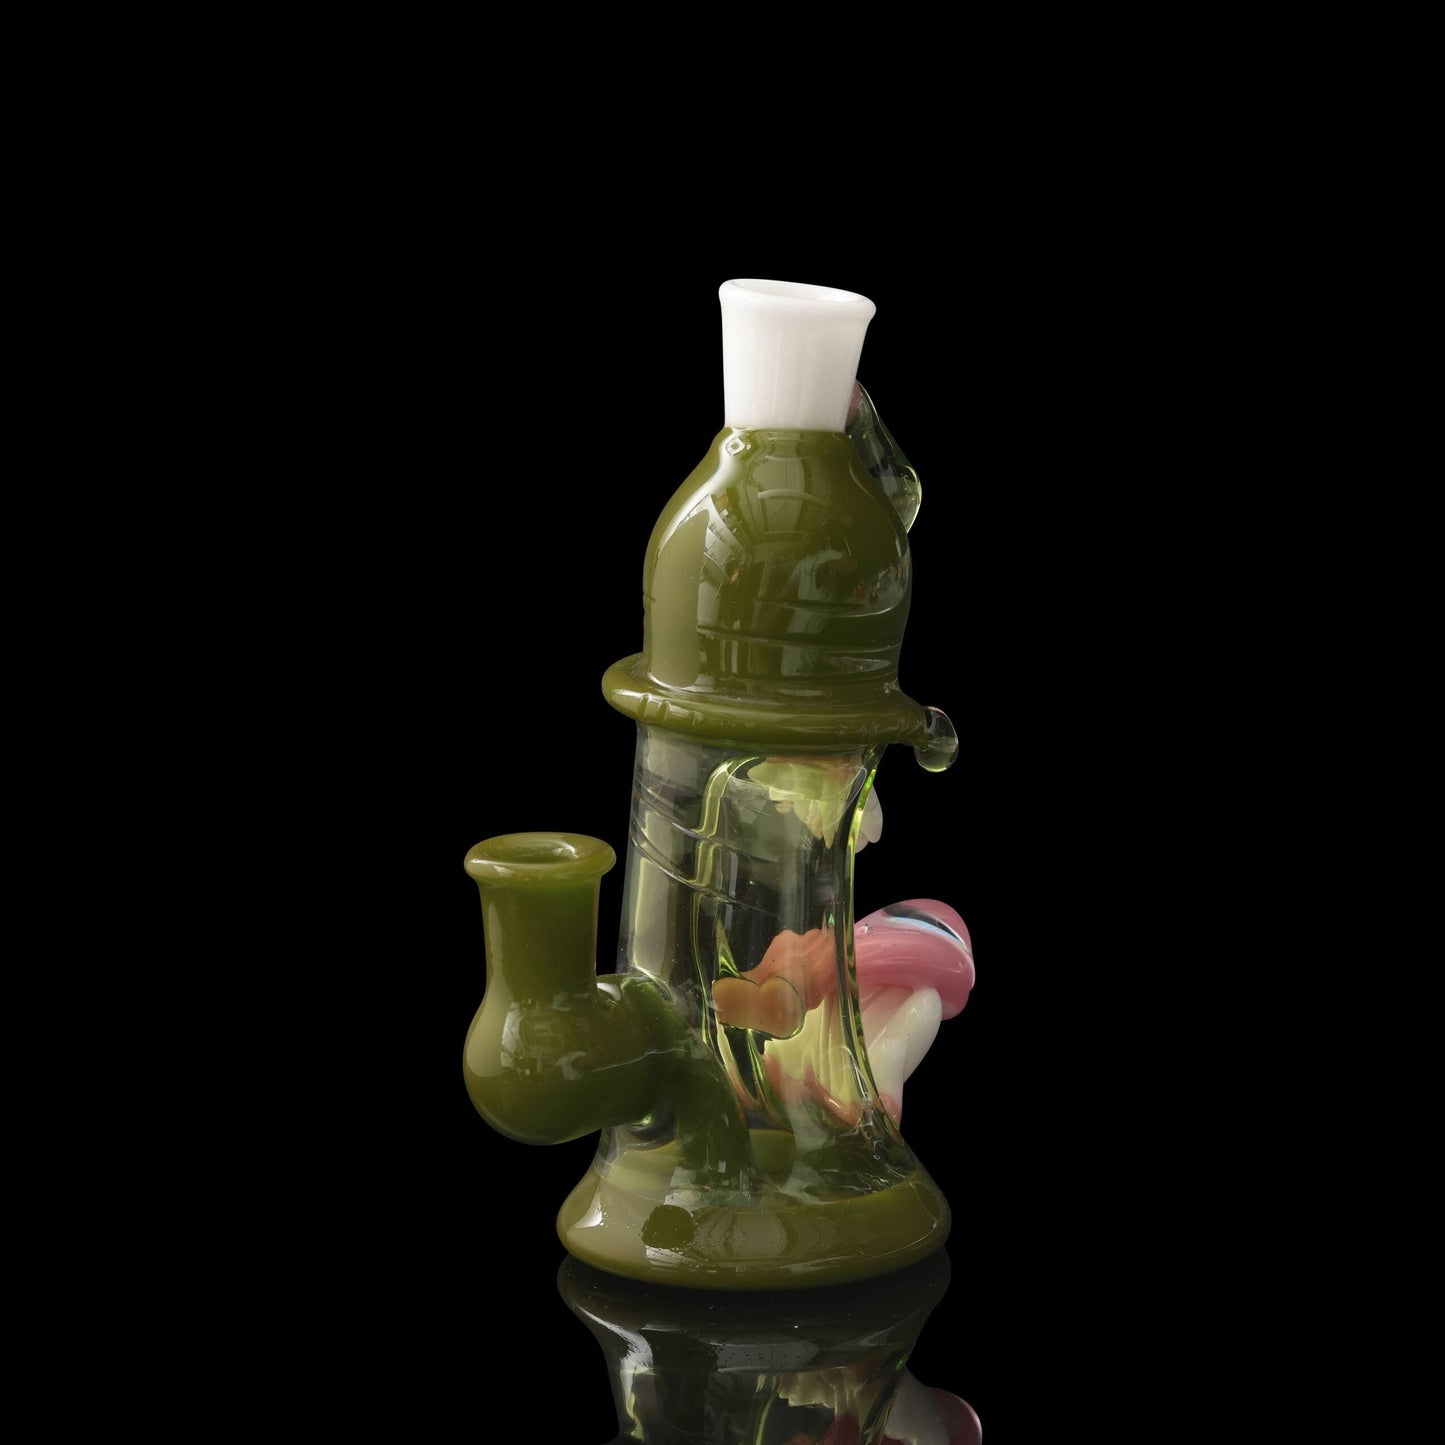 sophisticated design of the Green Down & Dirty Mini Rig by GlassHole (2023)